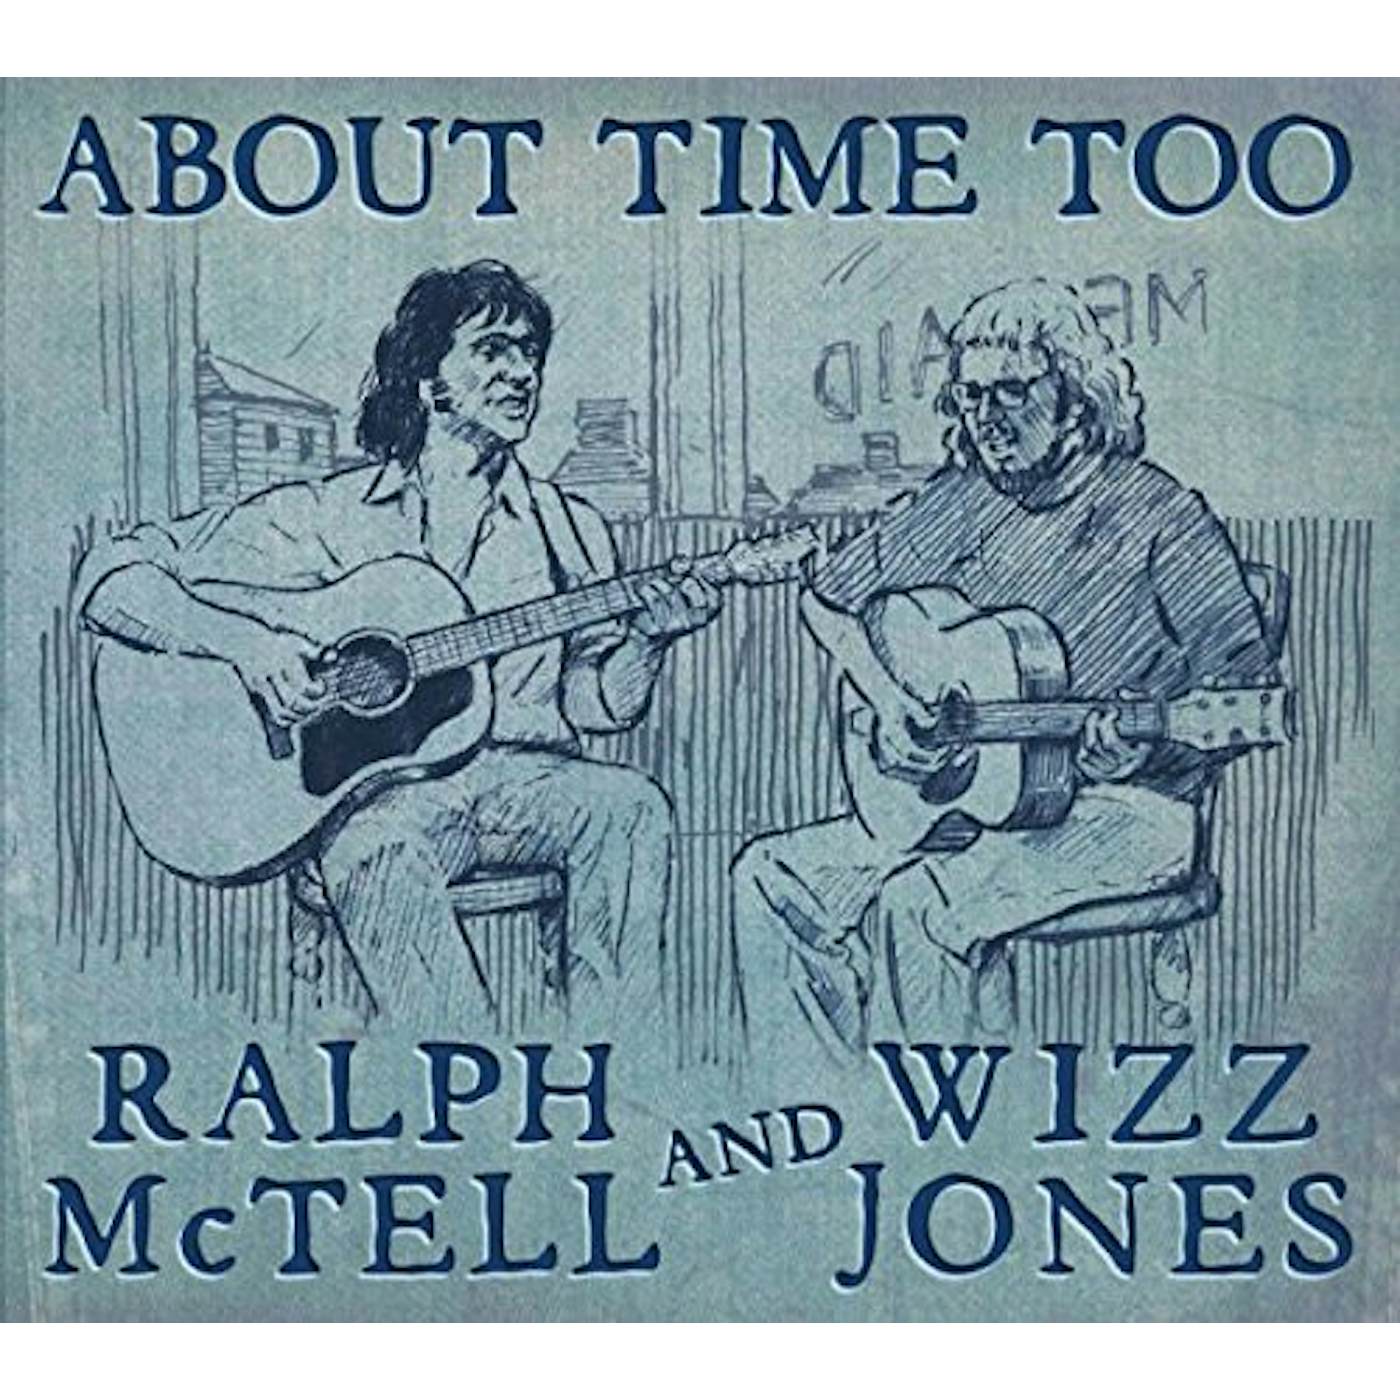 Ralph Mctell & Wizz Jones ABOUT TIME TOO CD